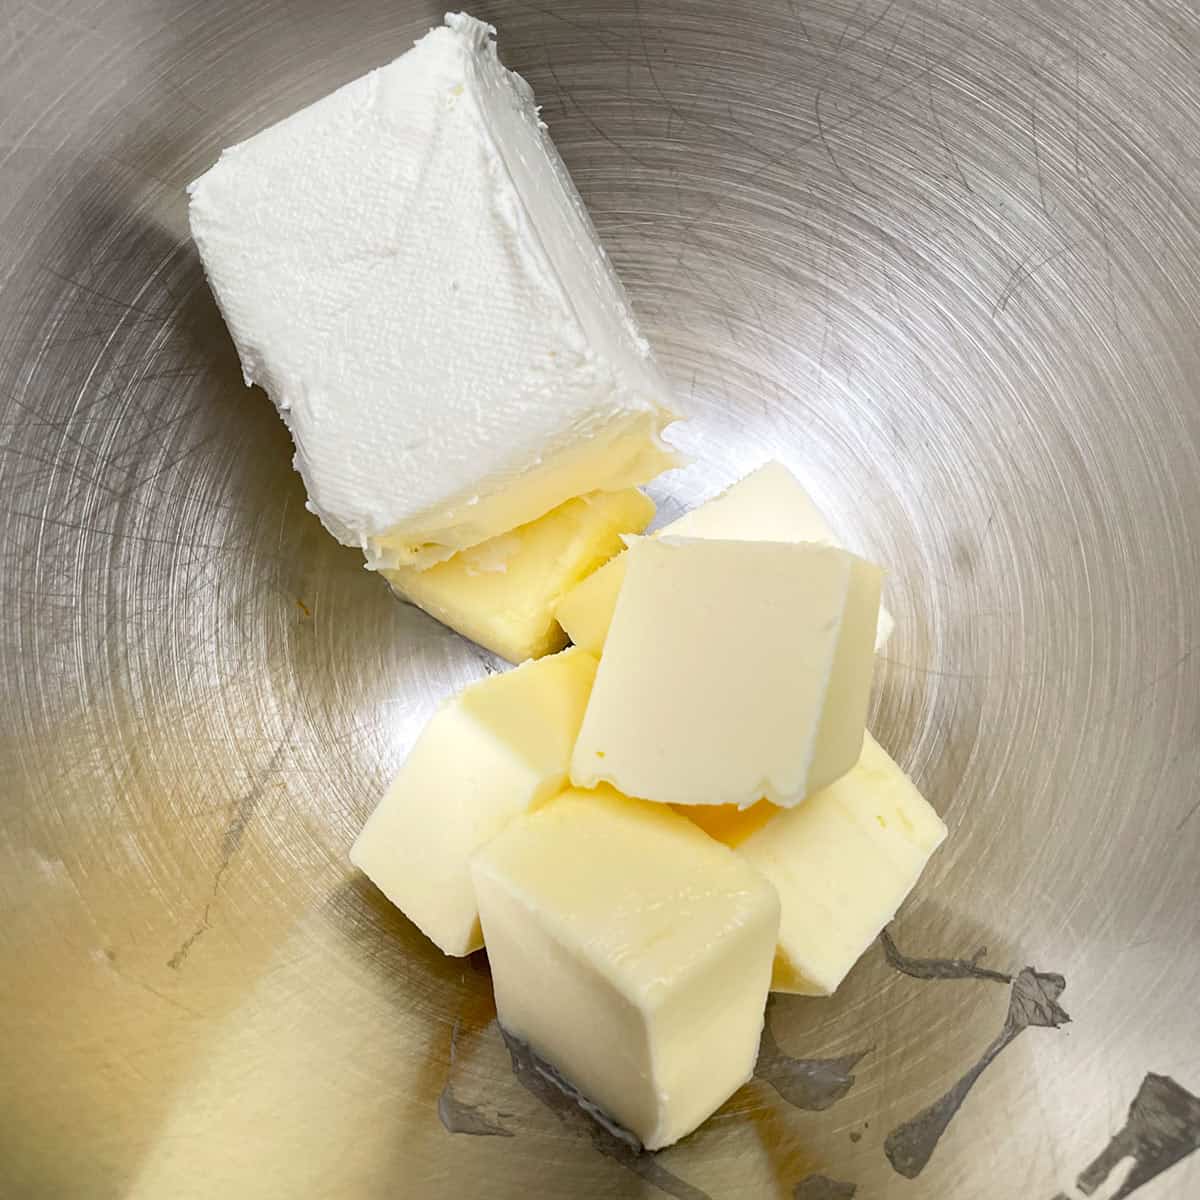 Cubed butter and cream cheese in a mixer bowl getting ready to be creamed.